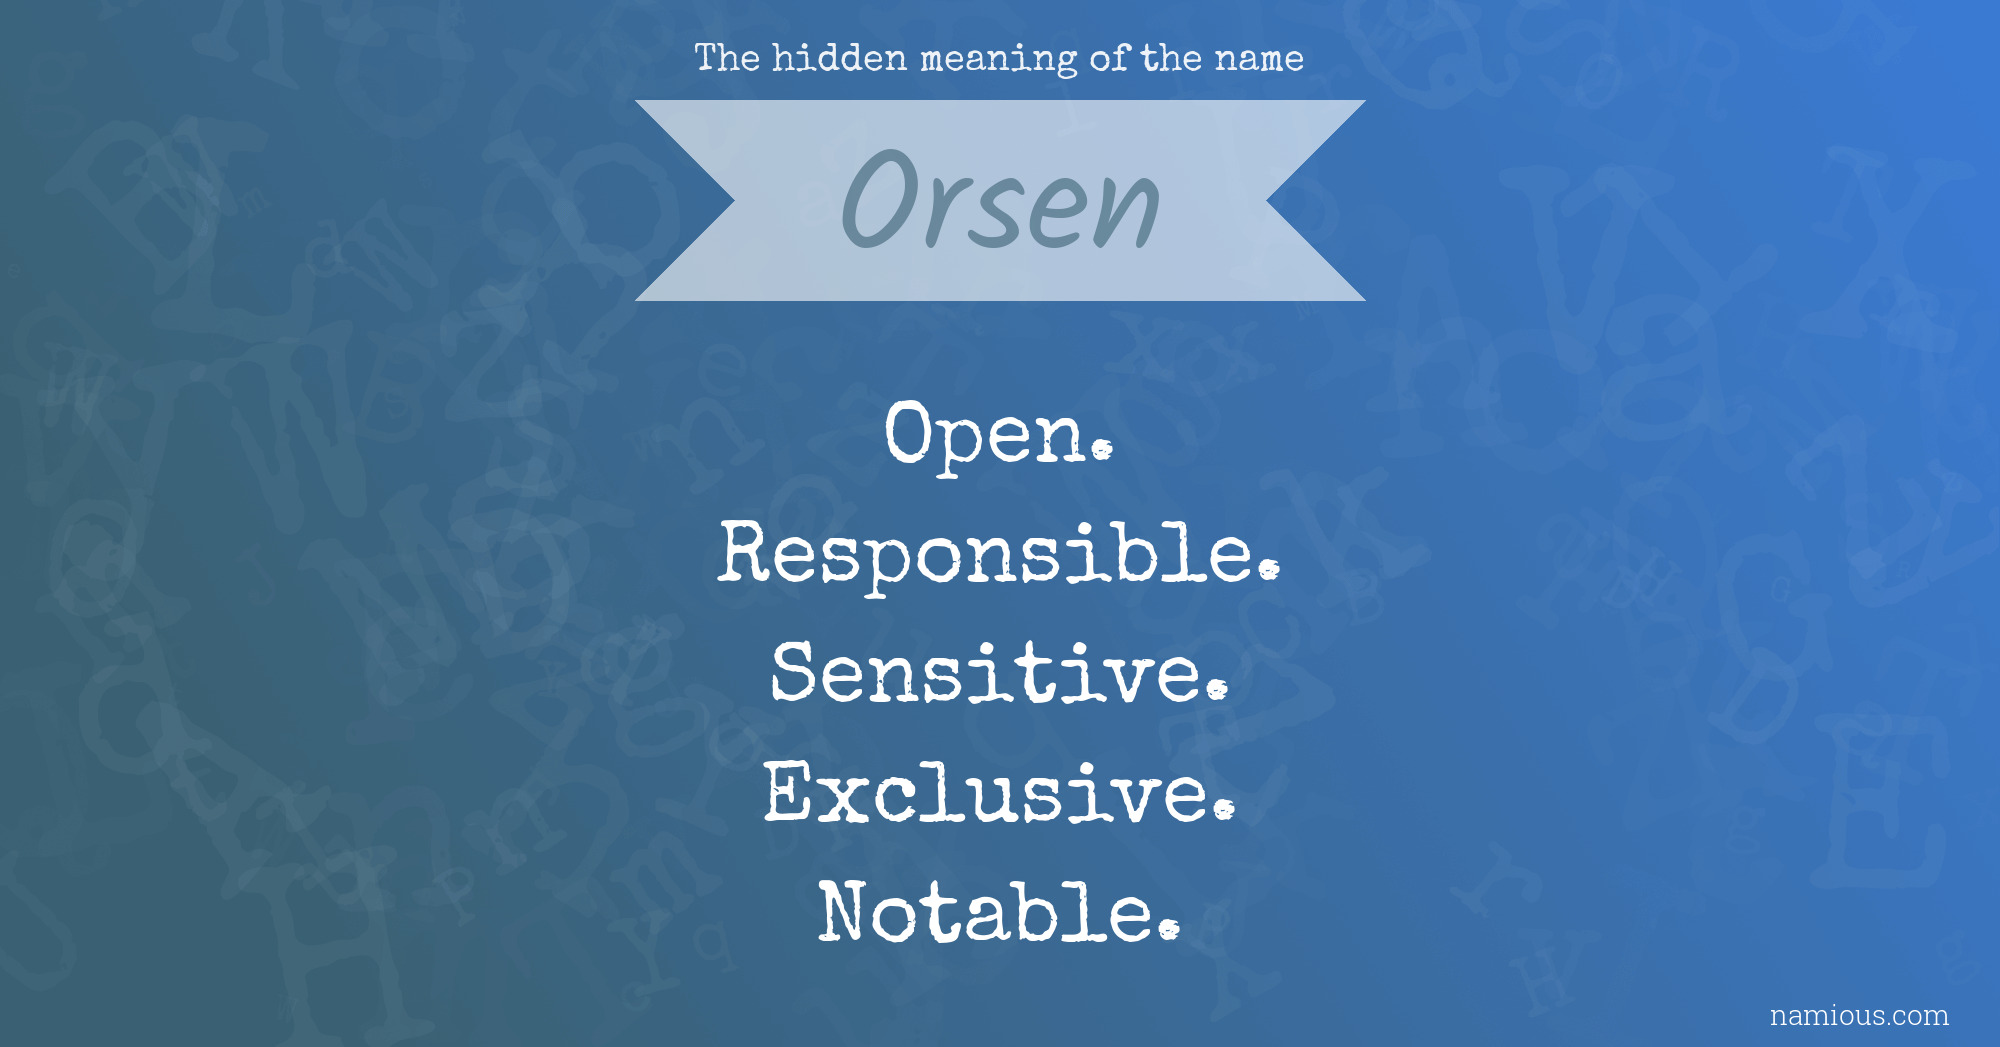 The hidden meaning of the name Orsen